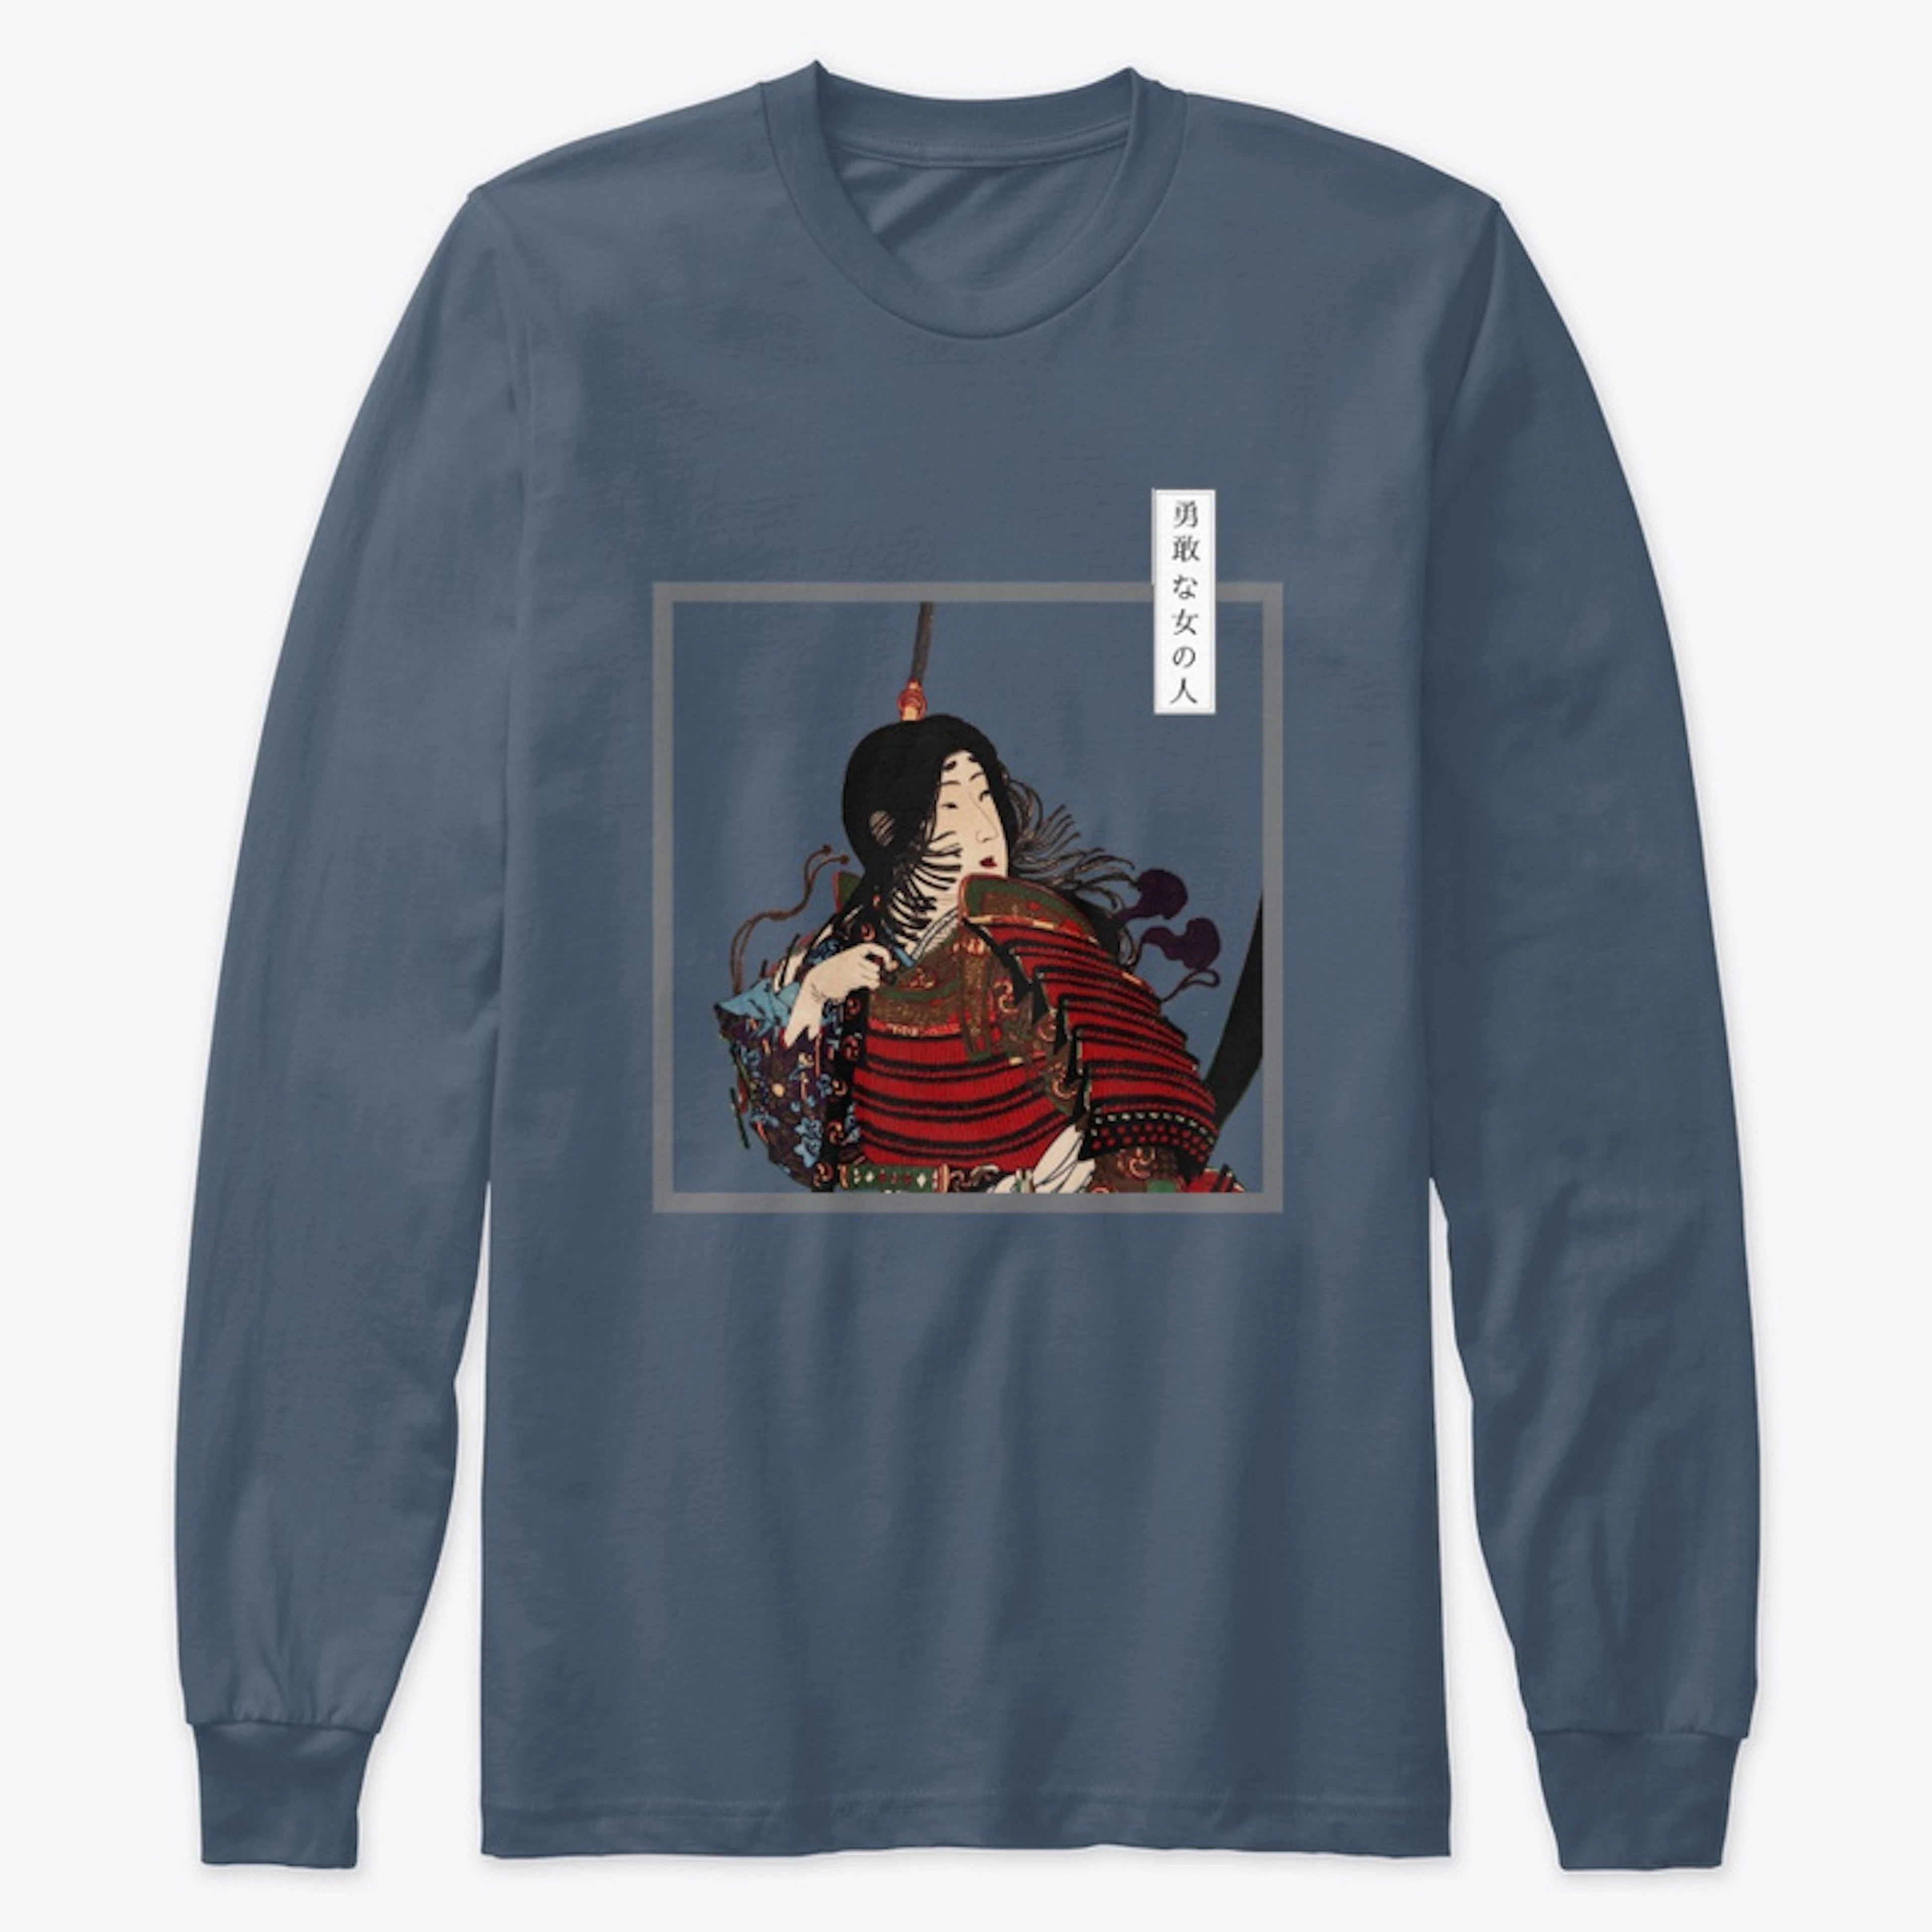 Woman of Valor (sweater)